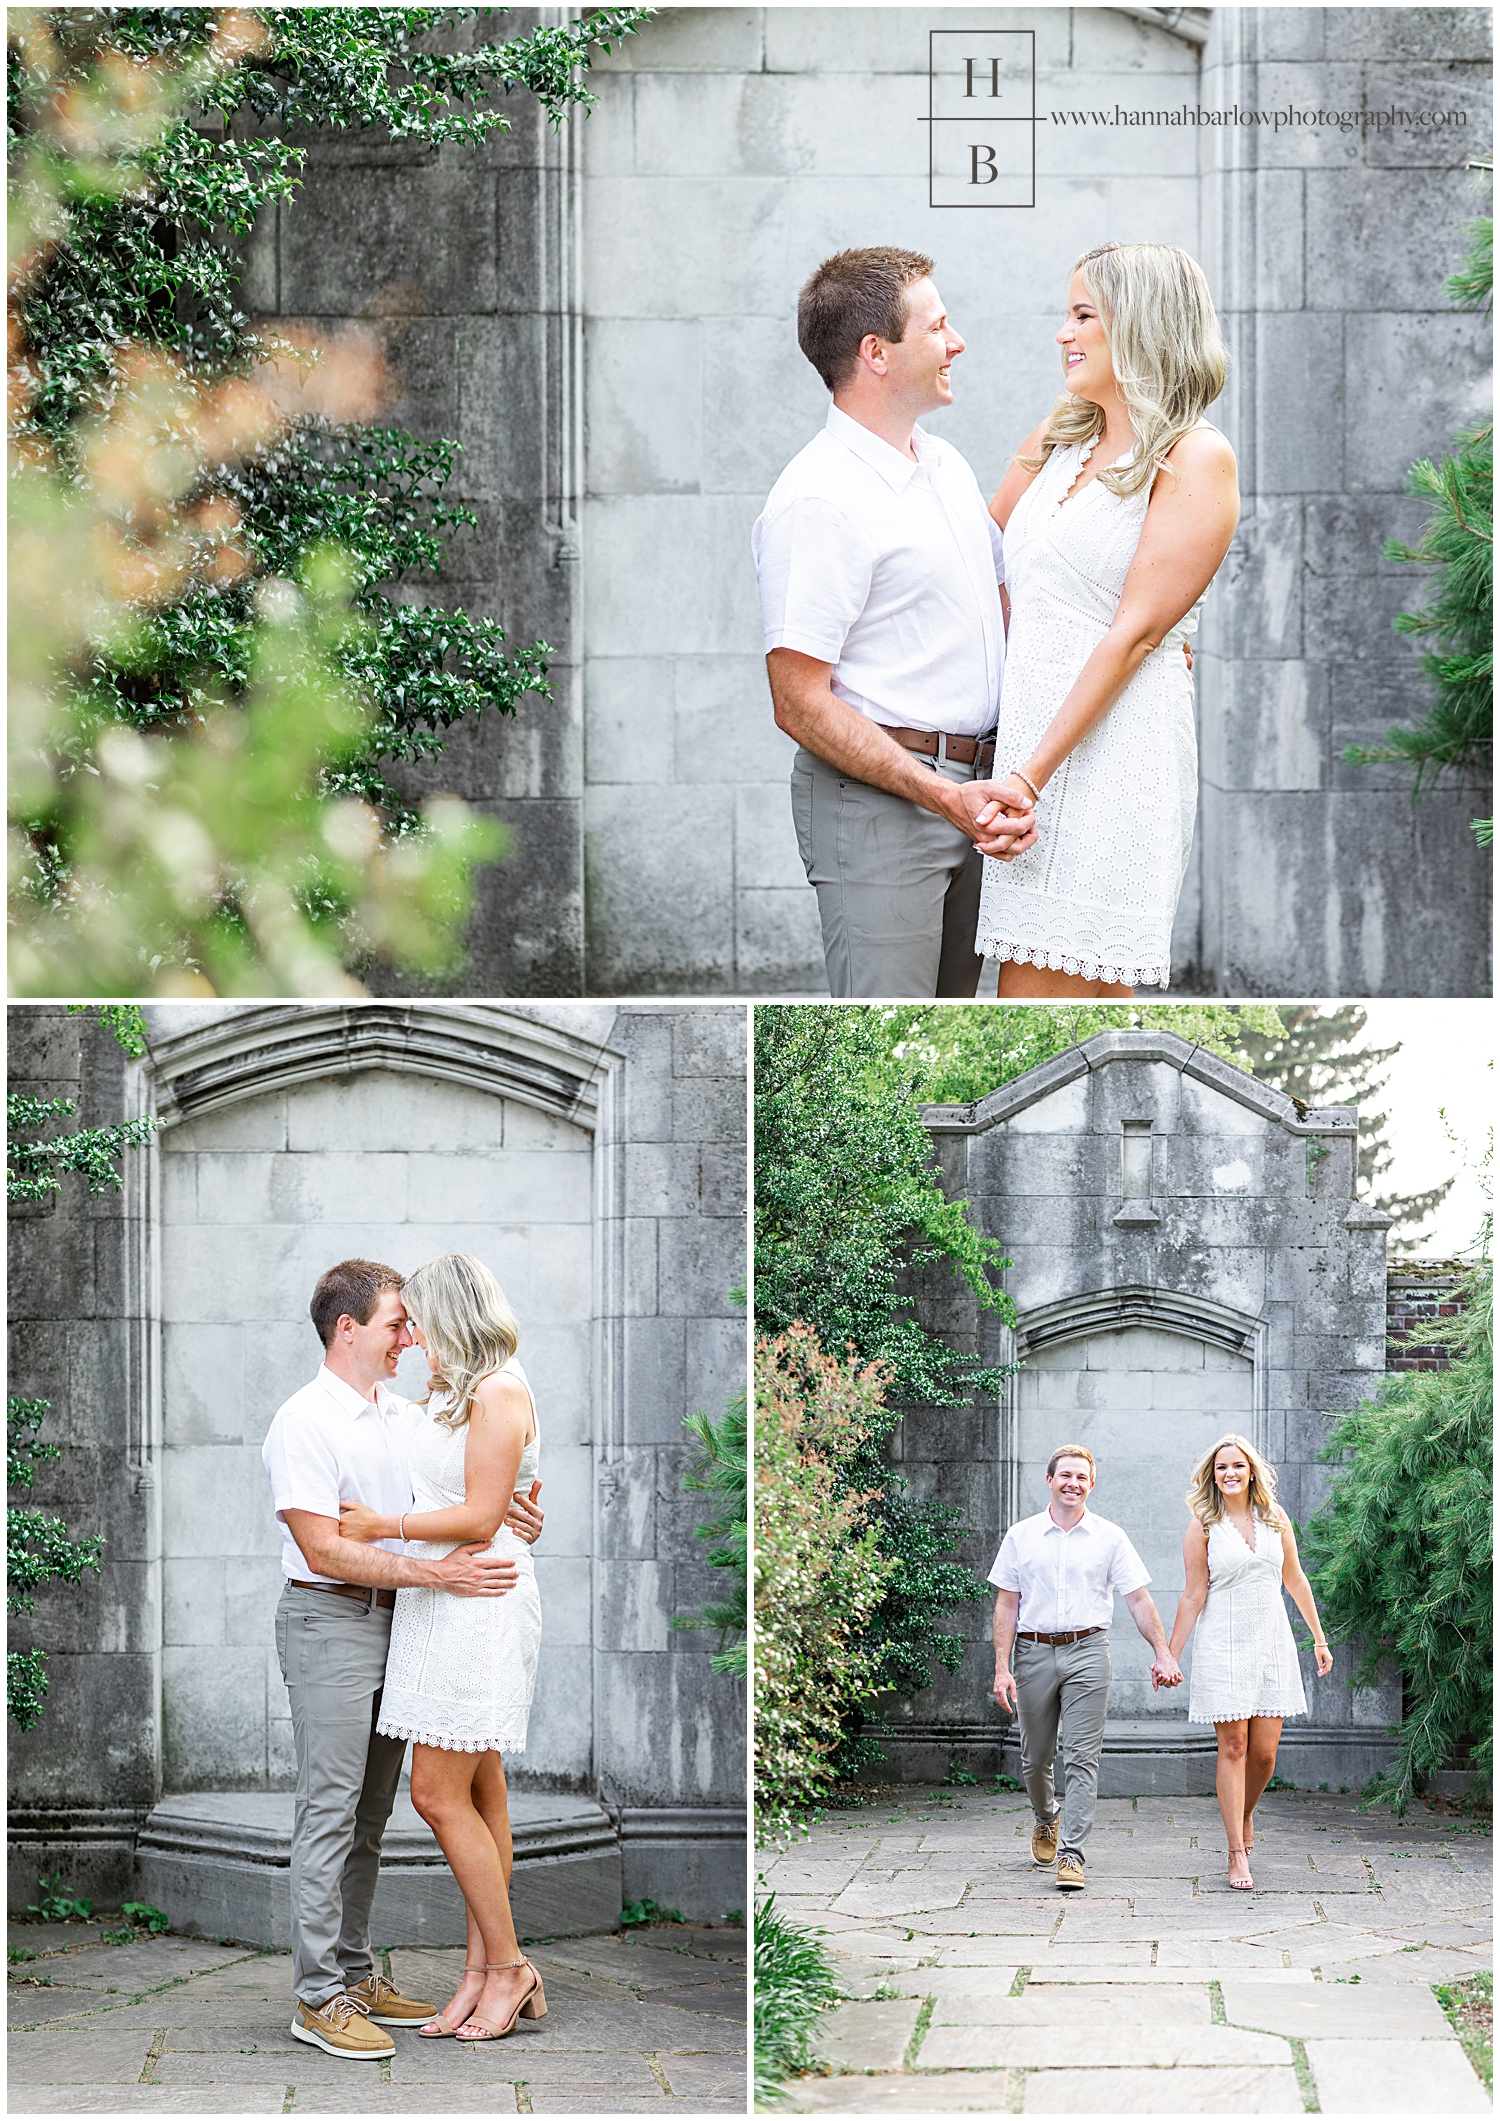 Couple stands in front of stone wall for engagement photos in June.